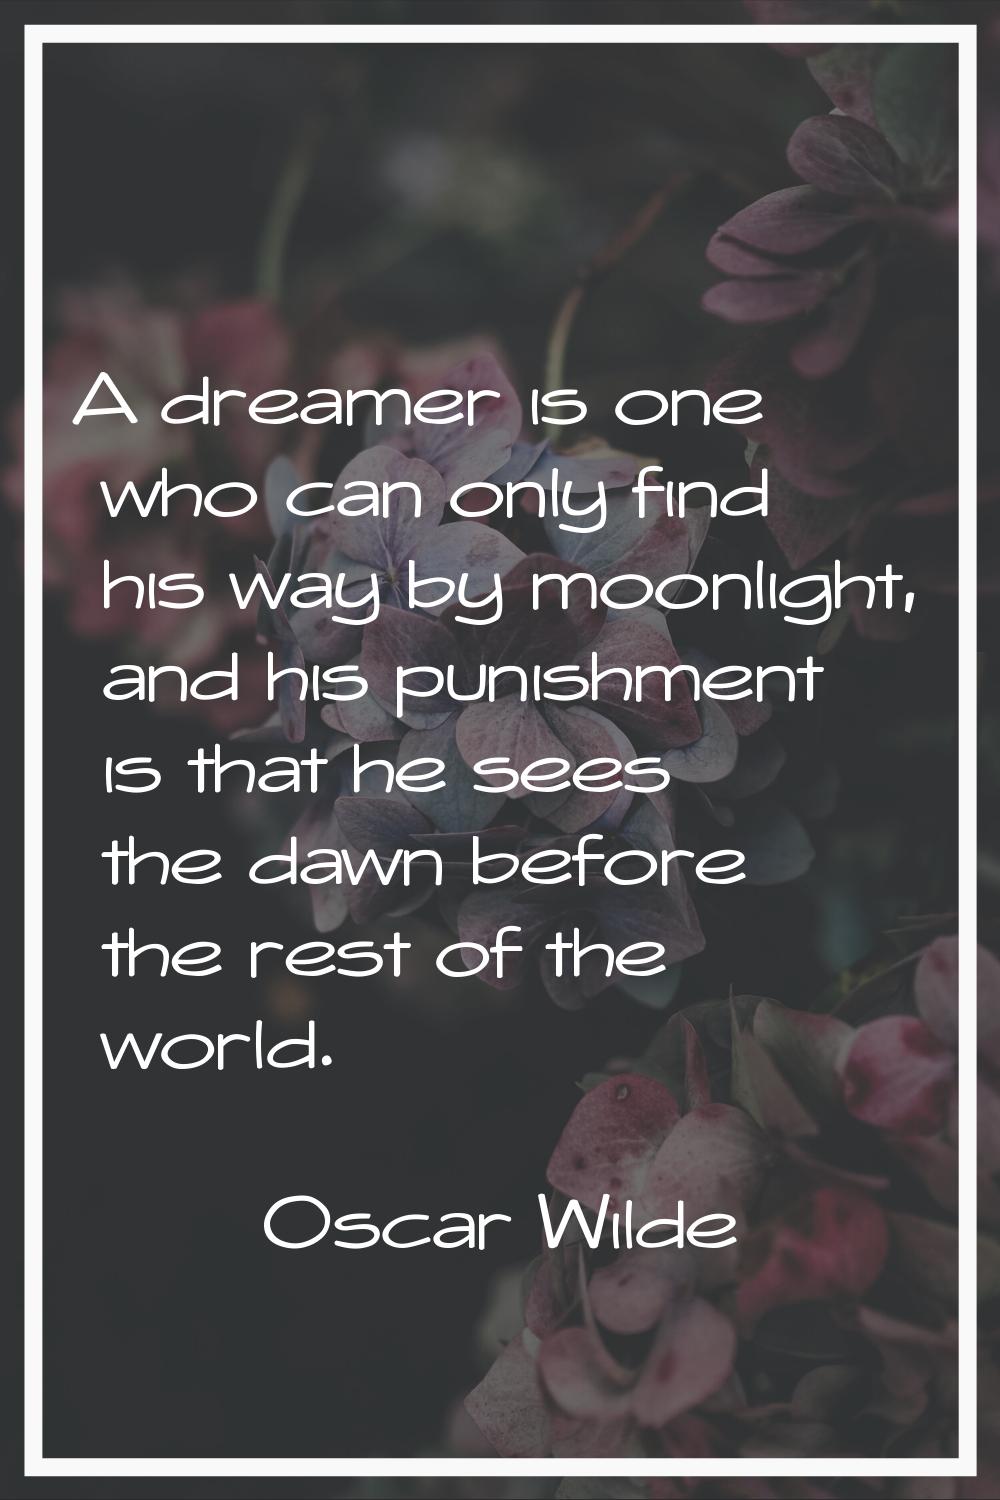 A dreamer is one who can only find his way by moonlight, and his punishment is that he sees the daw